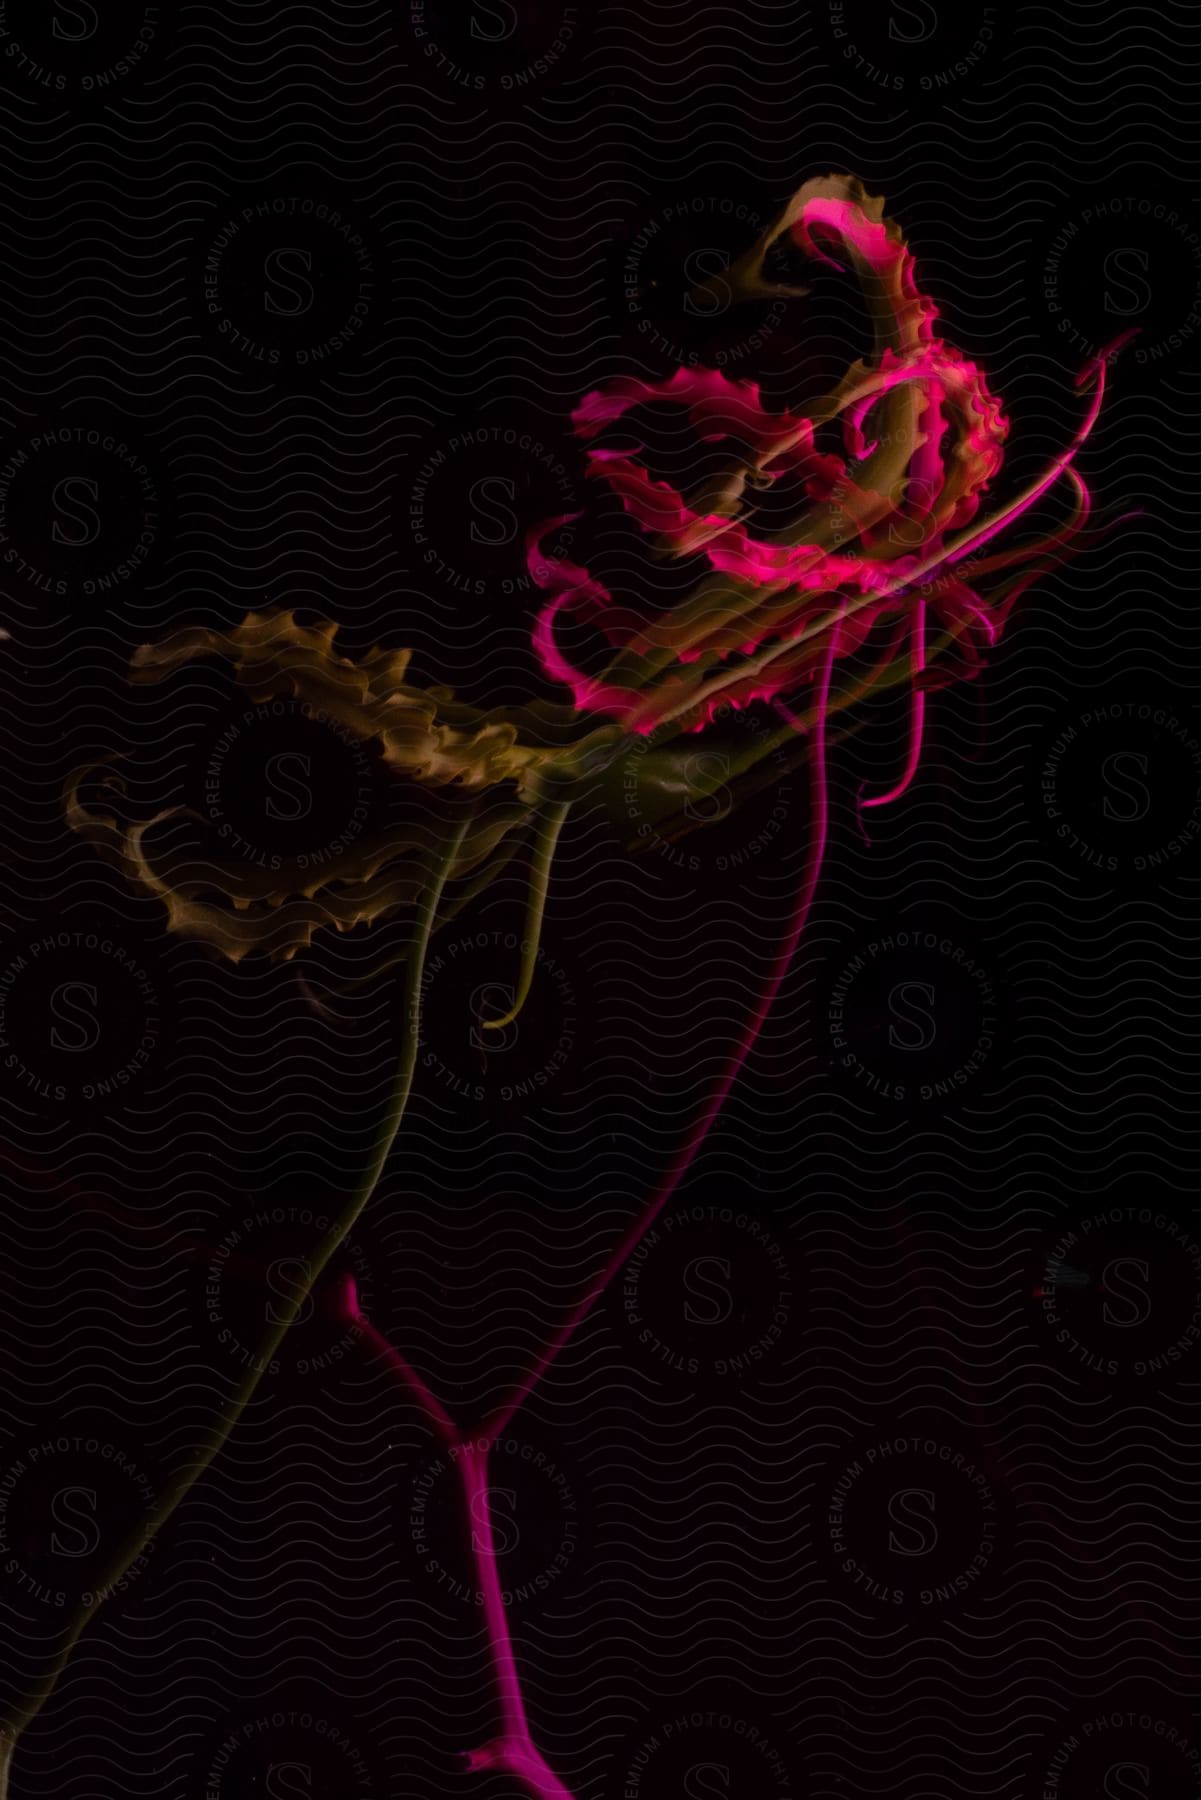 neon pink lines form a pattern against a black background